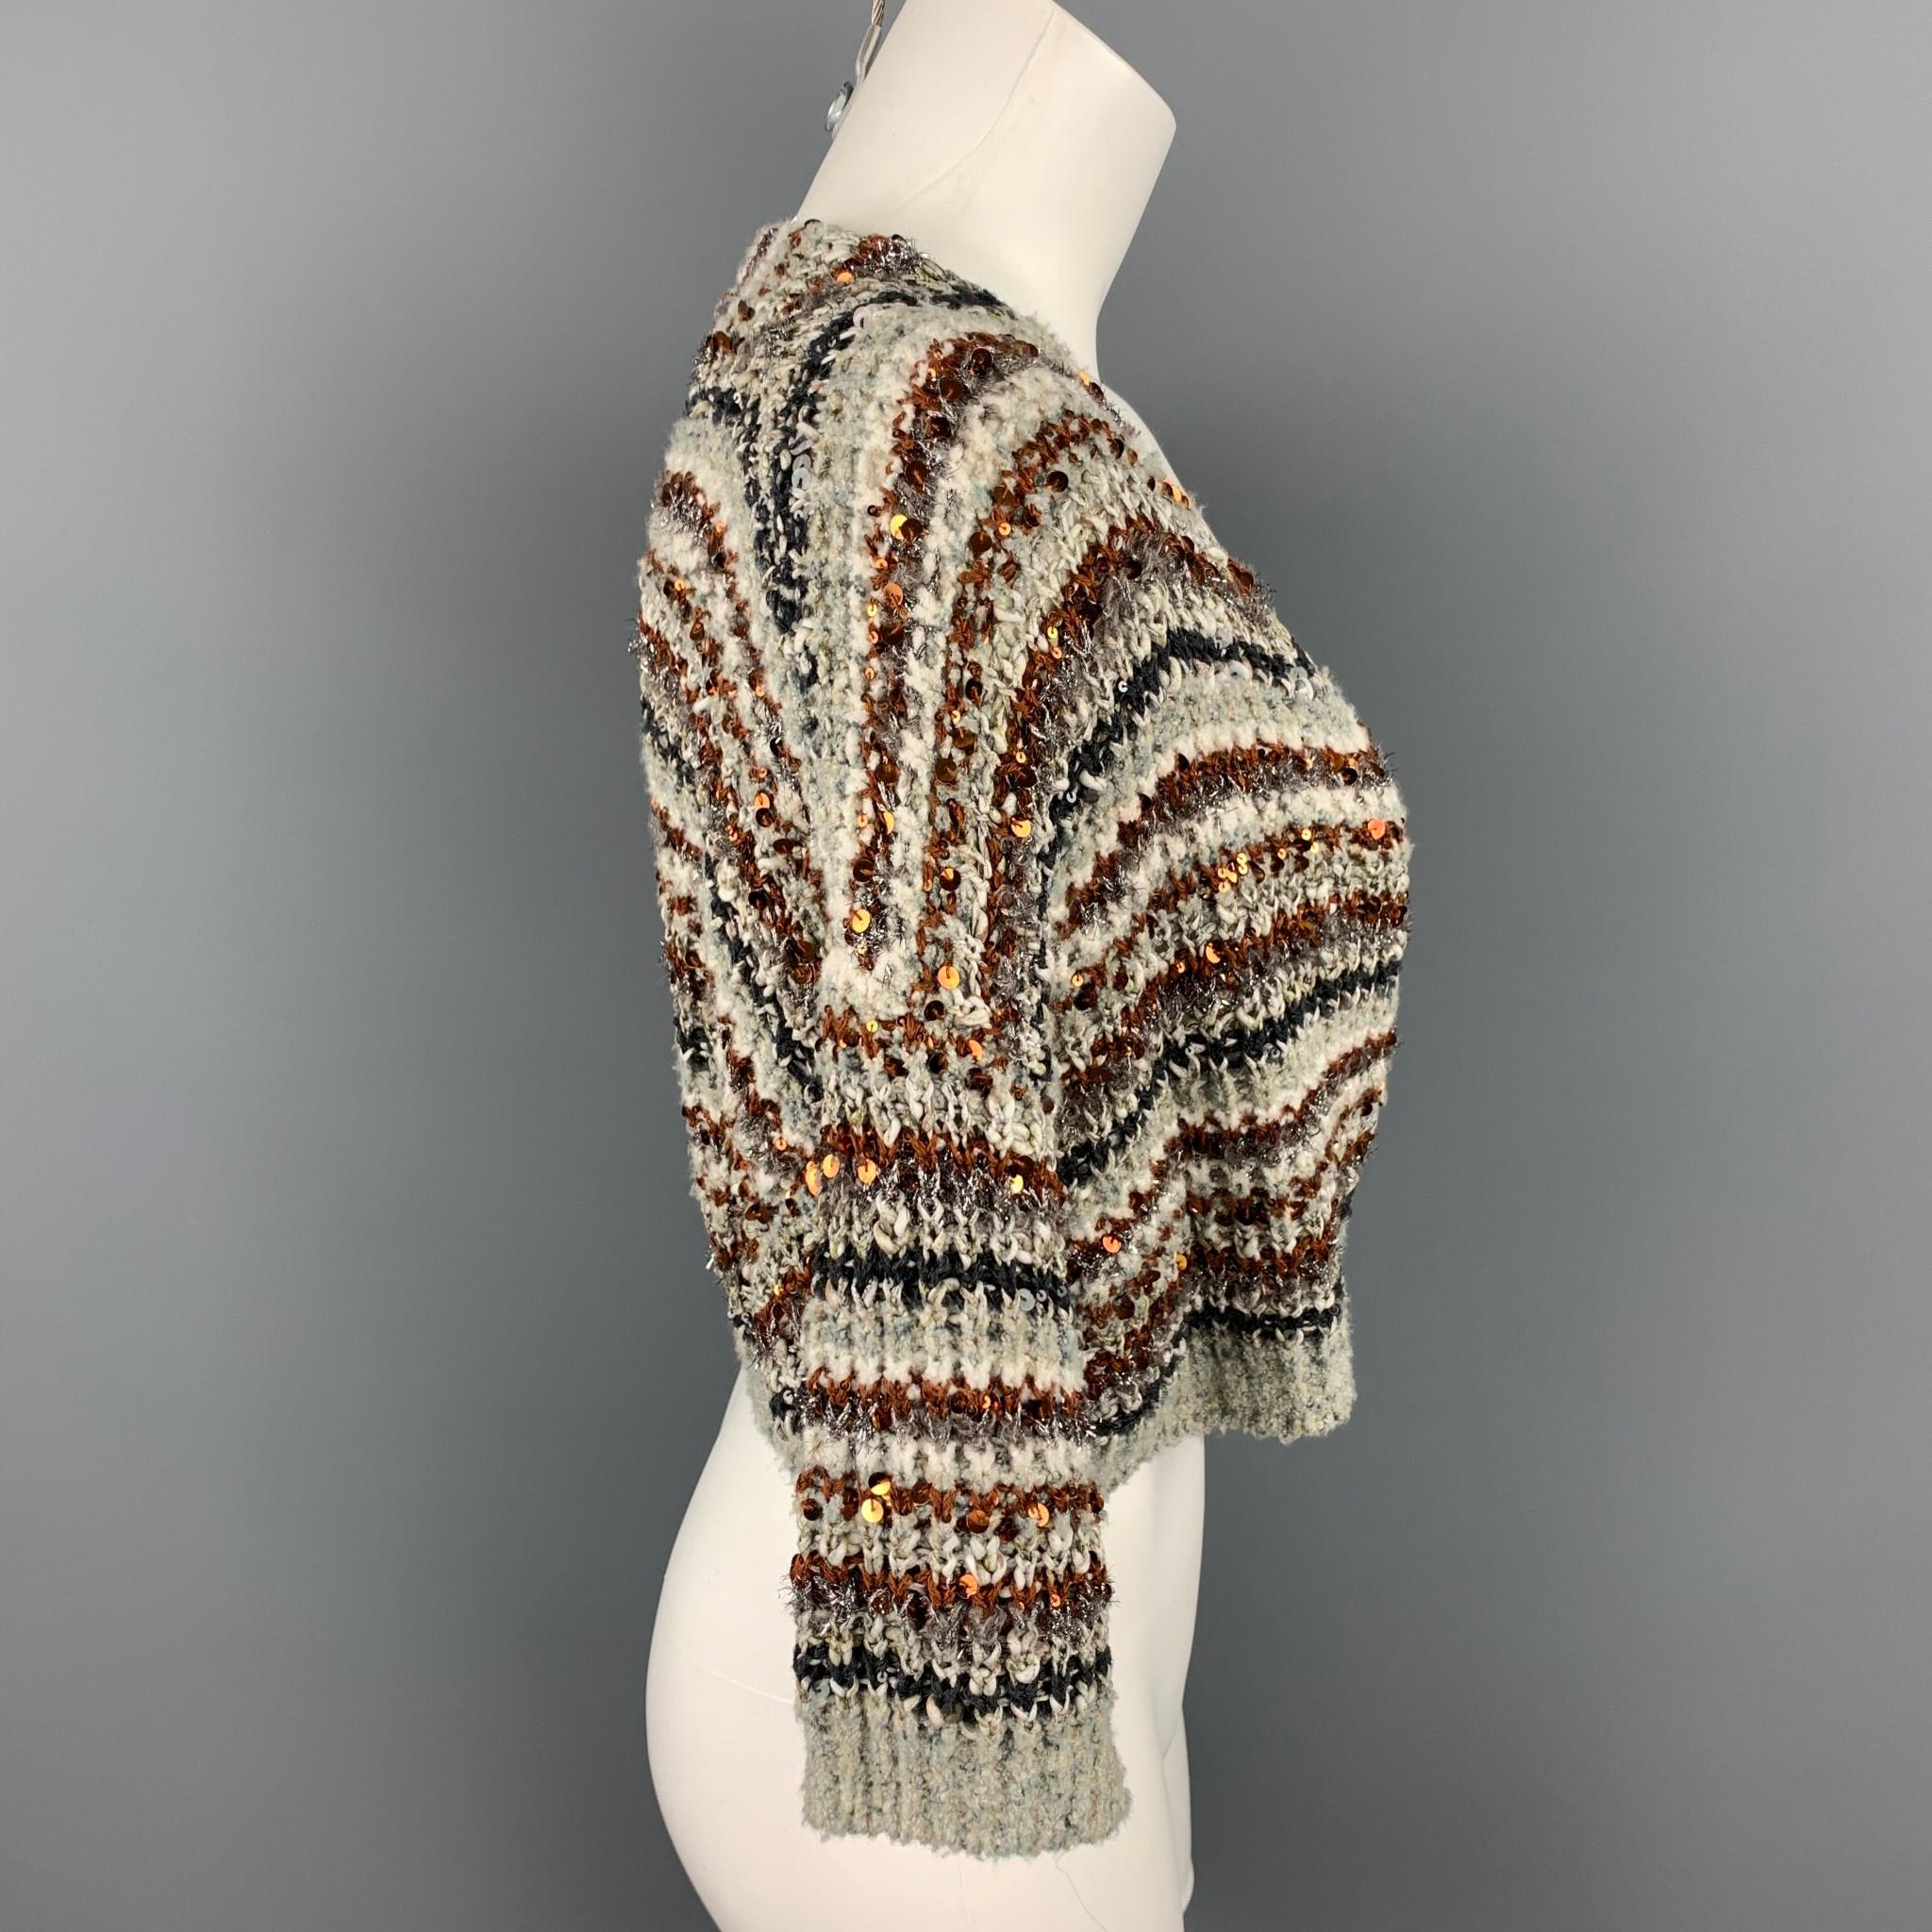 BRUNELLO CUCINELLI cardigan comes in a multi-color sequin cotton blend featuring a cropped style and a snap button closure. Made in Italy.

Very Good Pre-Owned Condition.
Marked: No size marked
Original Retail Price: